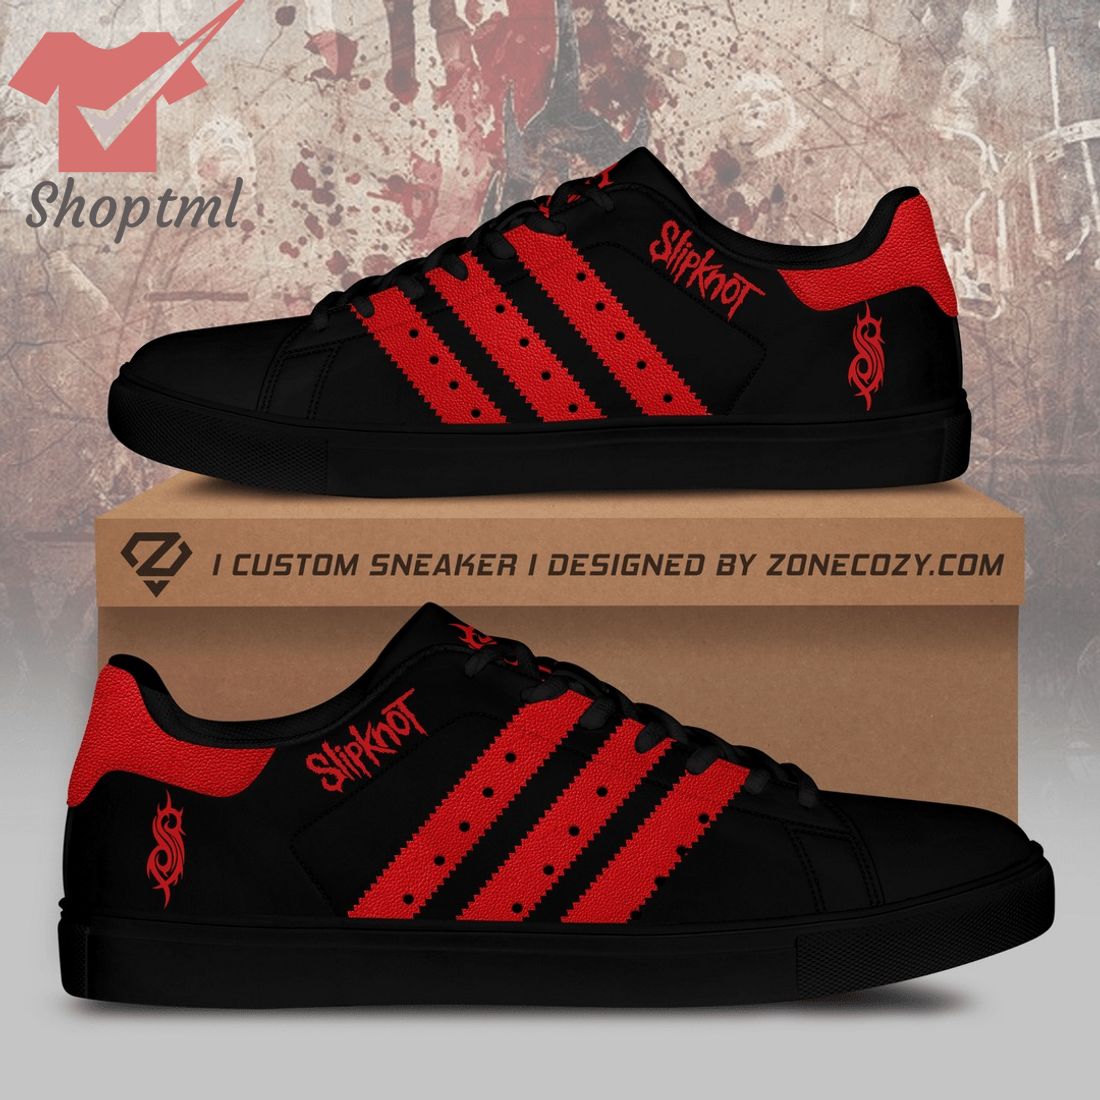 Slipknot band red ver 1 stan smith adidas shoes